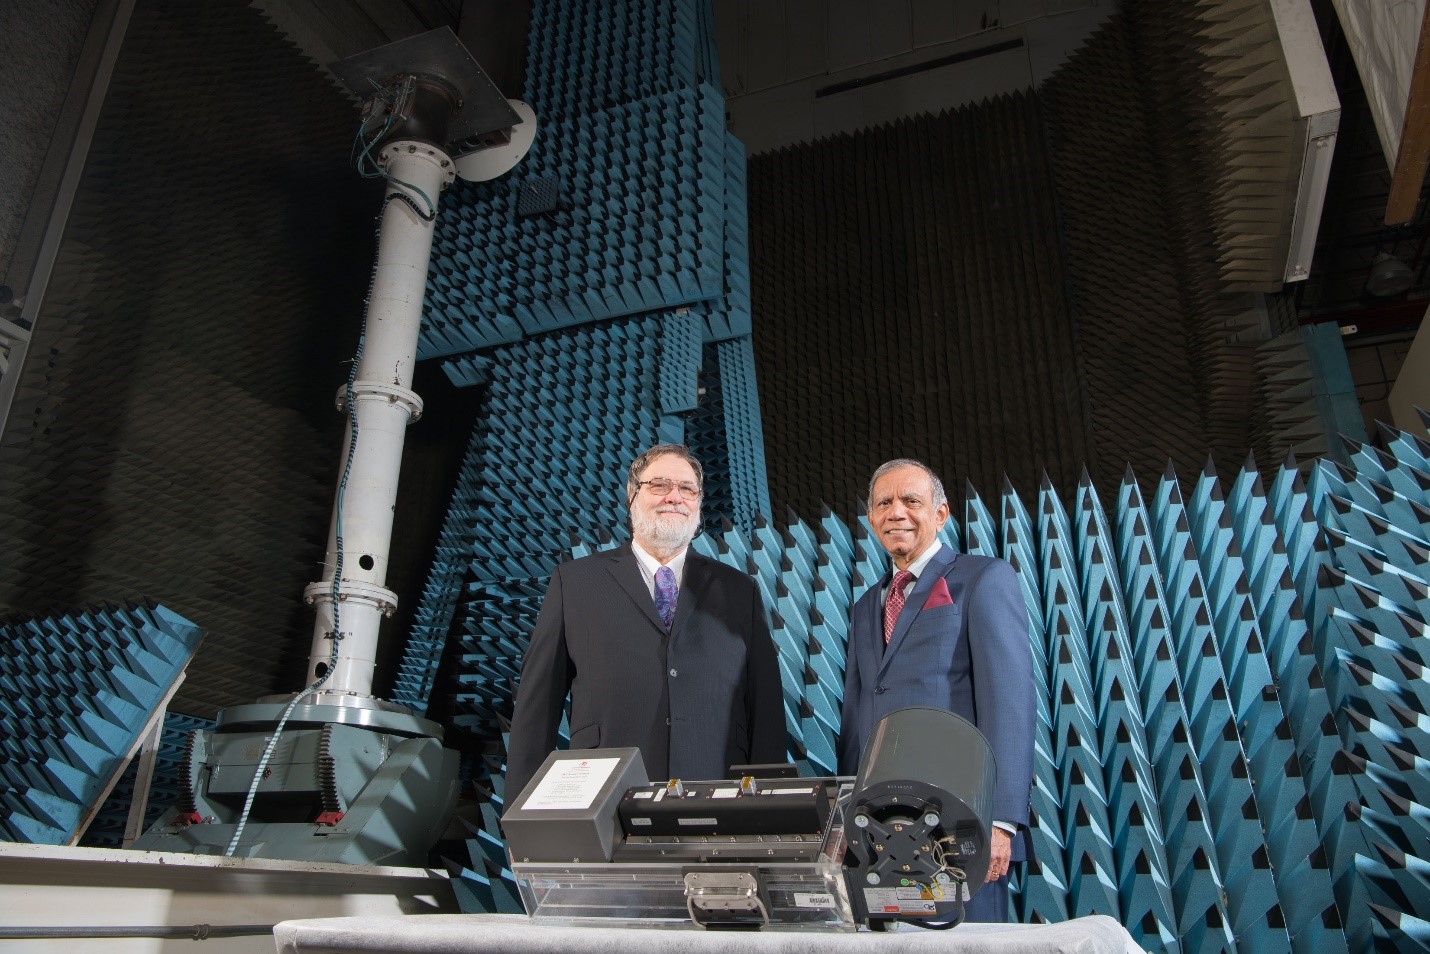 Space Technology Hall of Fame inductees, Dale Force and Dr. Rainee Simons, stand next to a 200-W Ka-band TWTA mounted on a cooling platform for lab testing. 